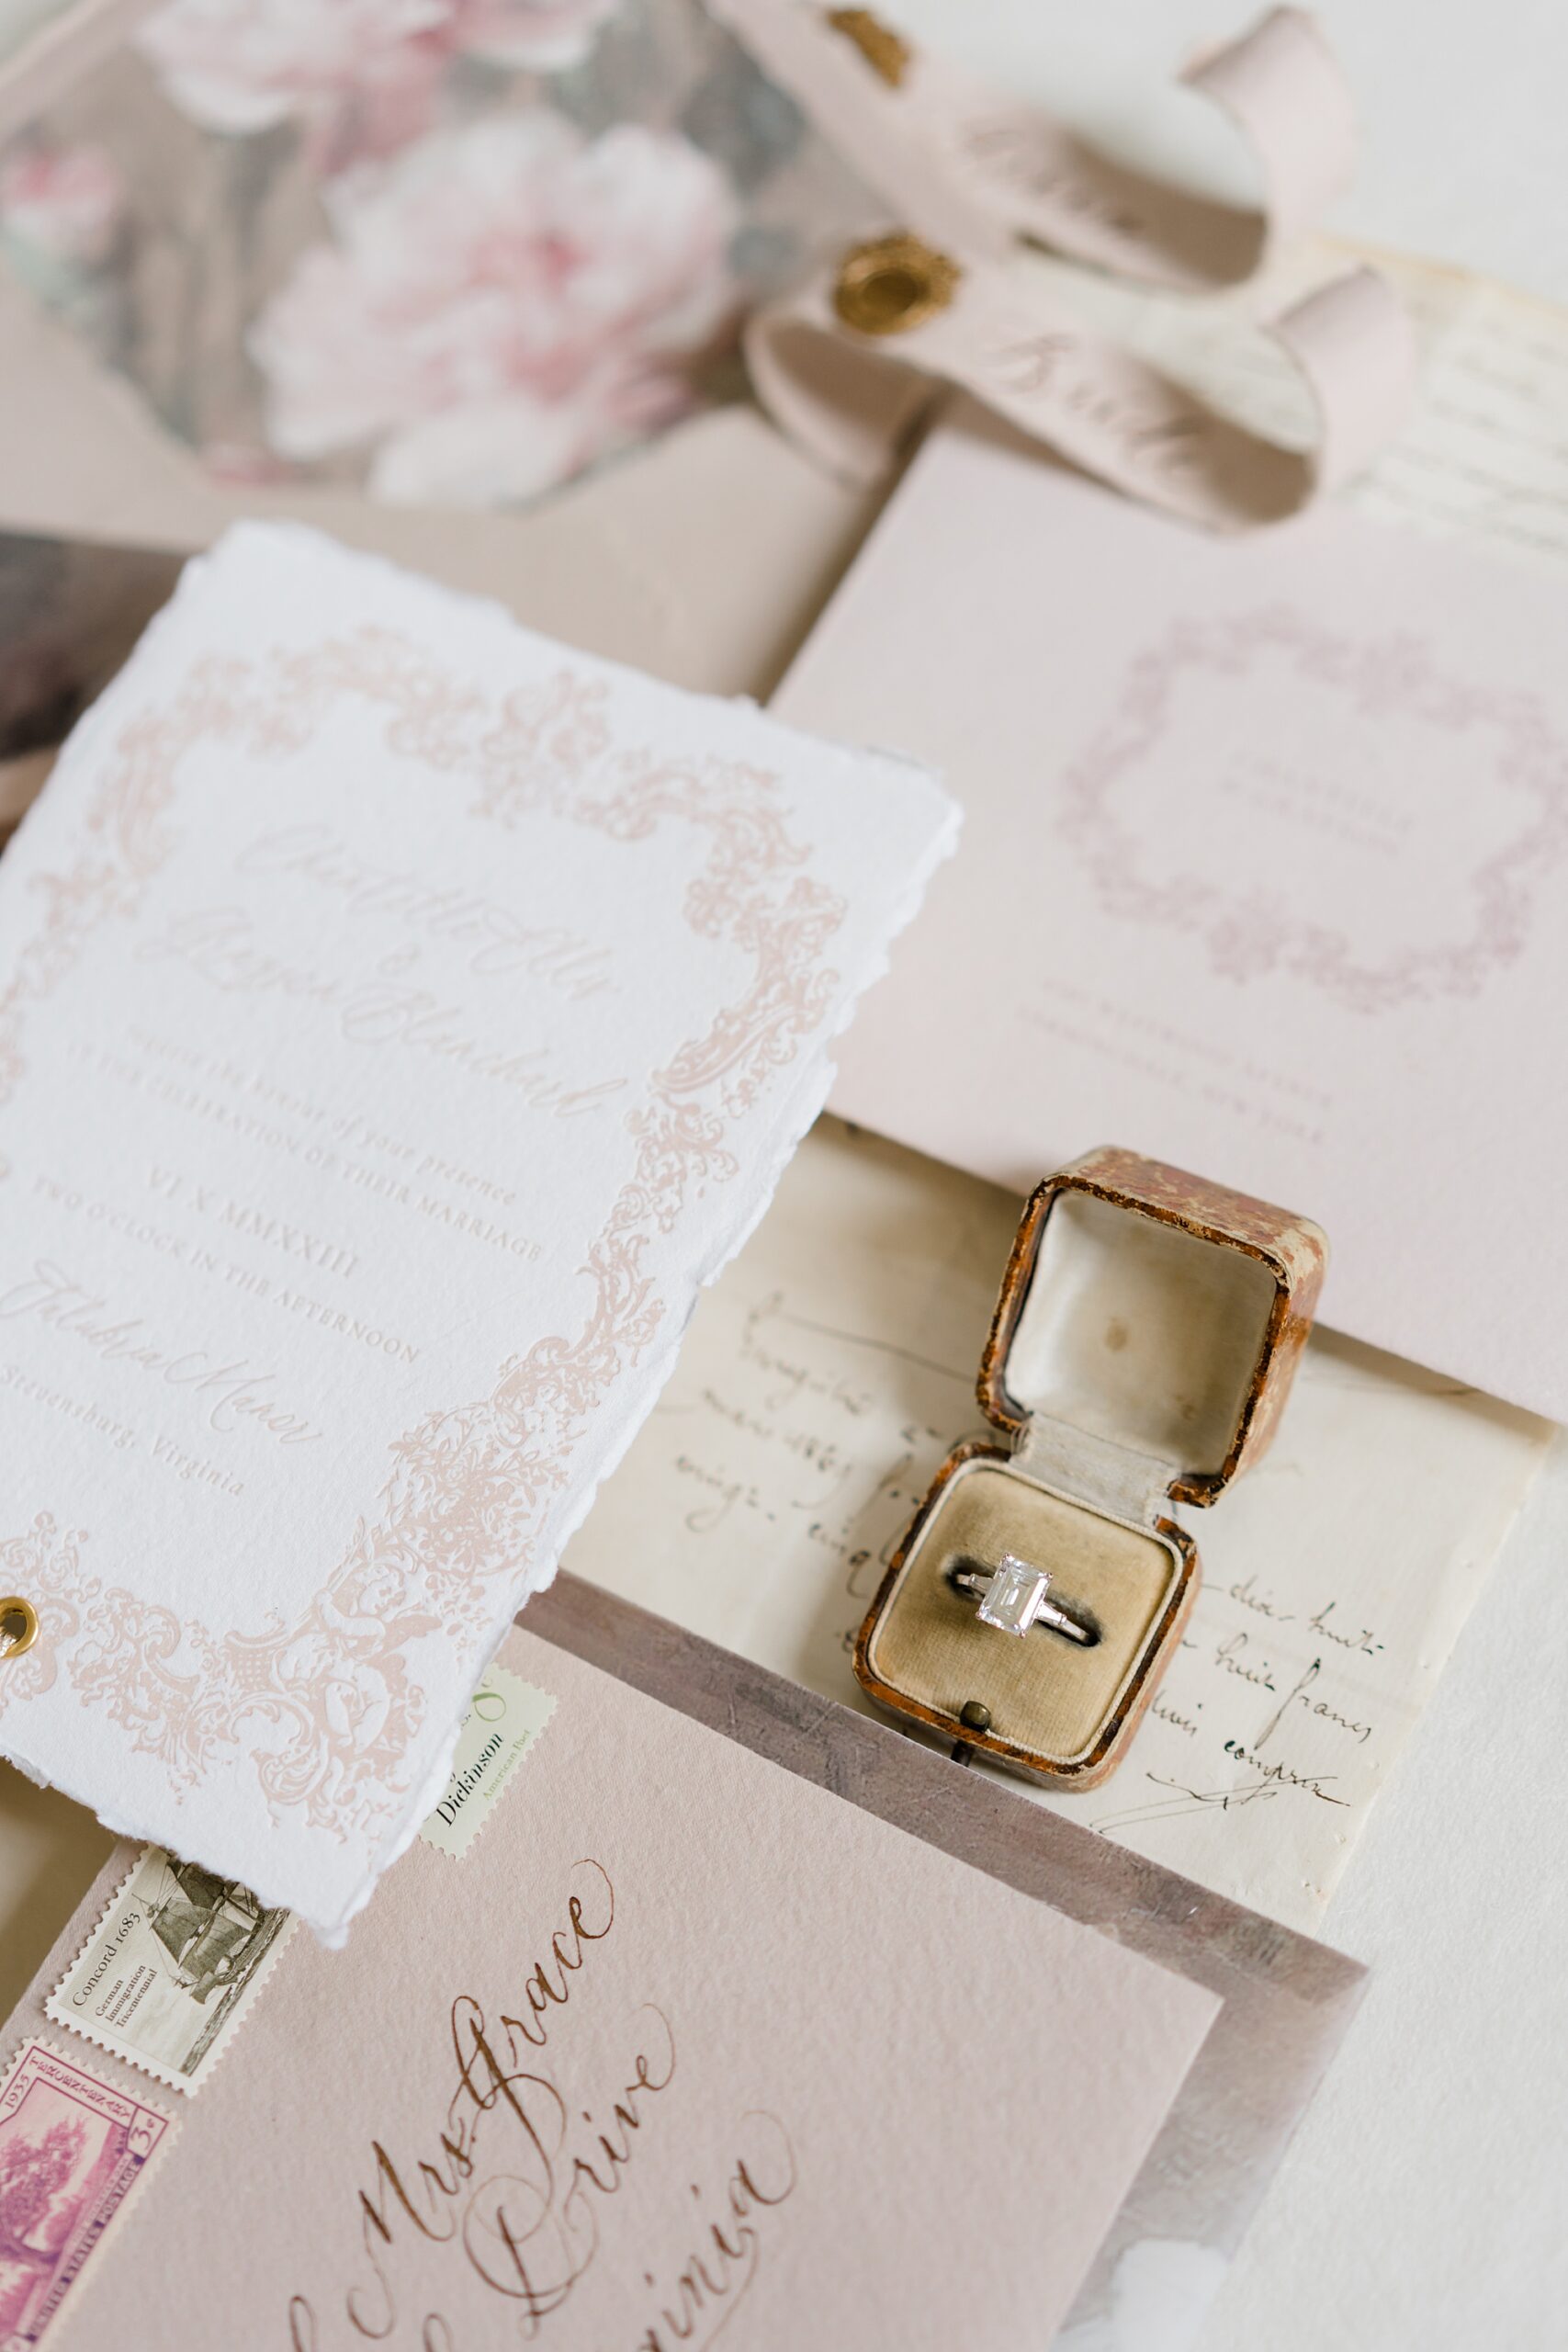 ring in gold ring box on invitations